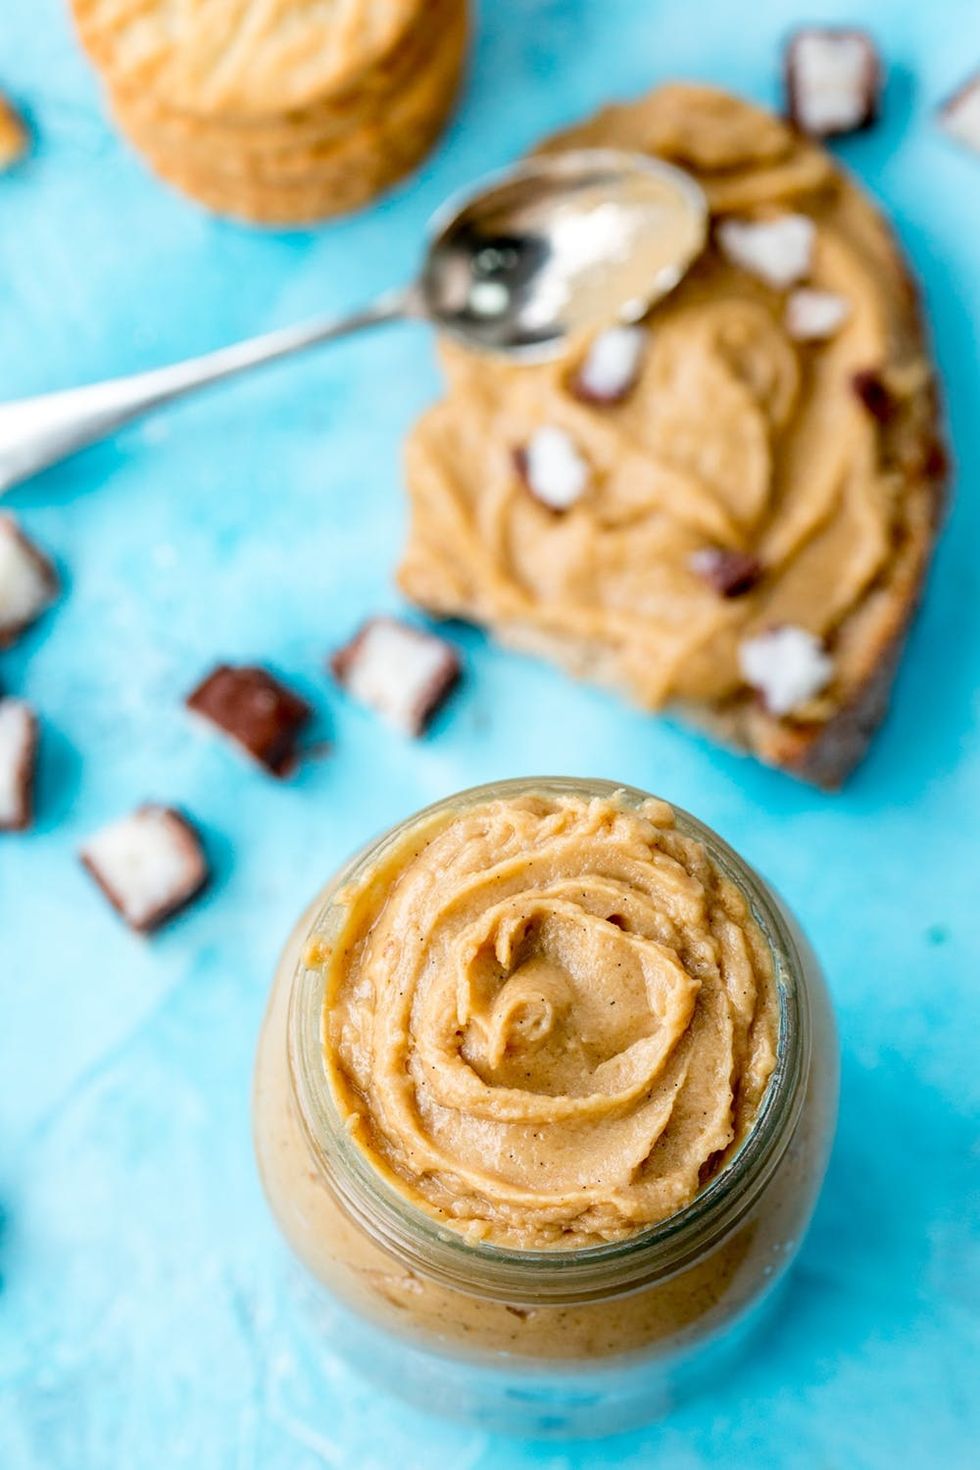 Forget Speculoos Spread - this coconut cookie butter recipe is awesome!